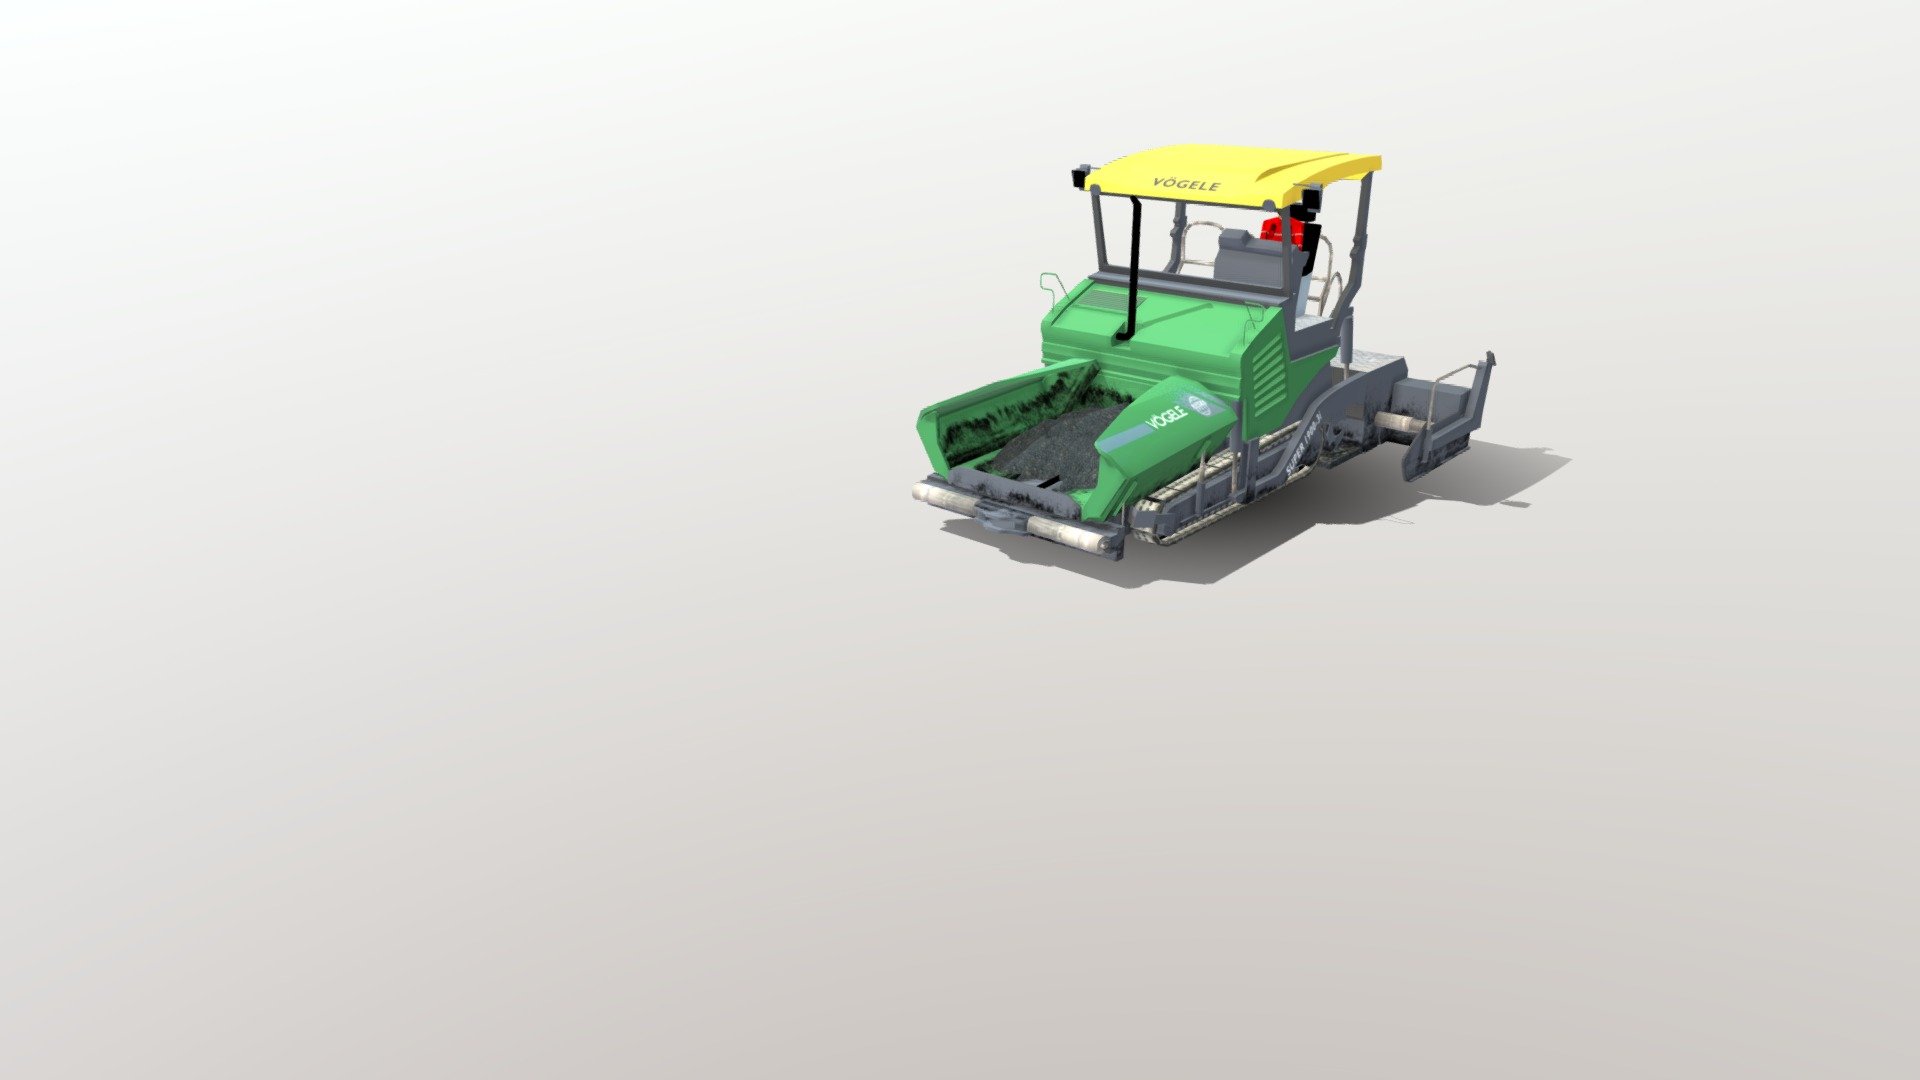 Hey !

This low-poly, animated asset is based on the real paving machine &ldquo;Vögele Super 1900-3i